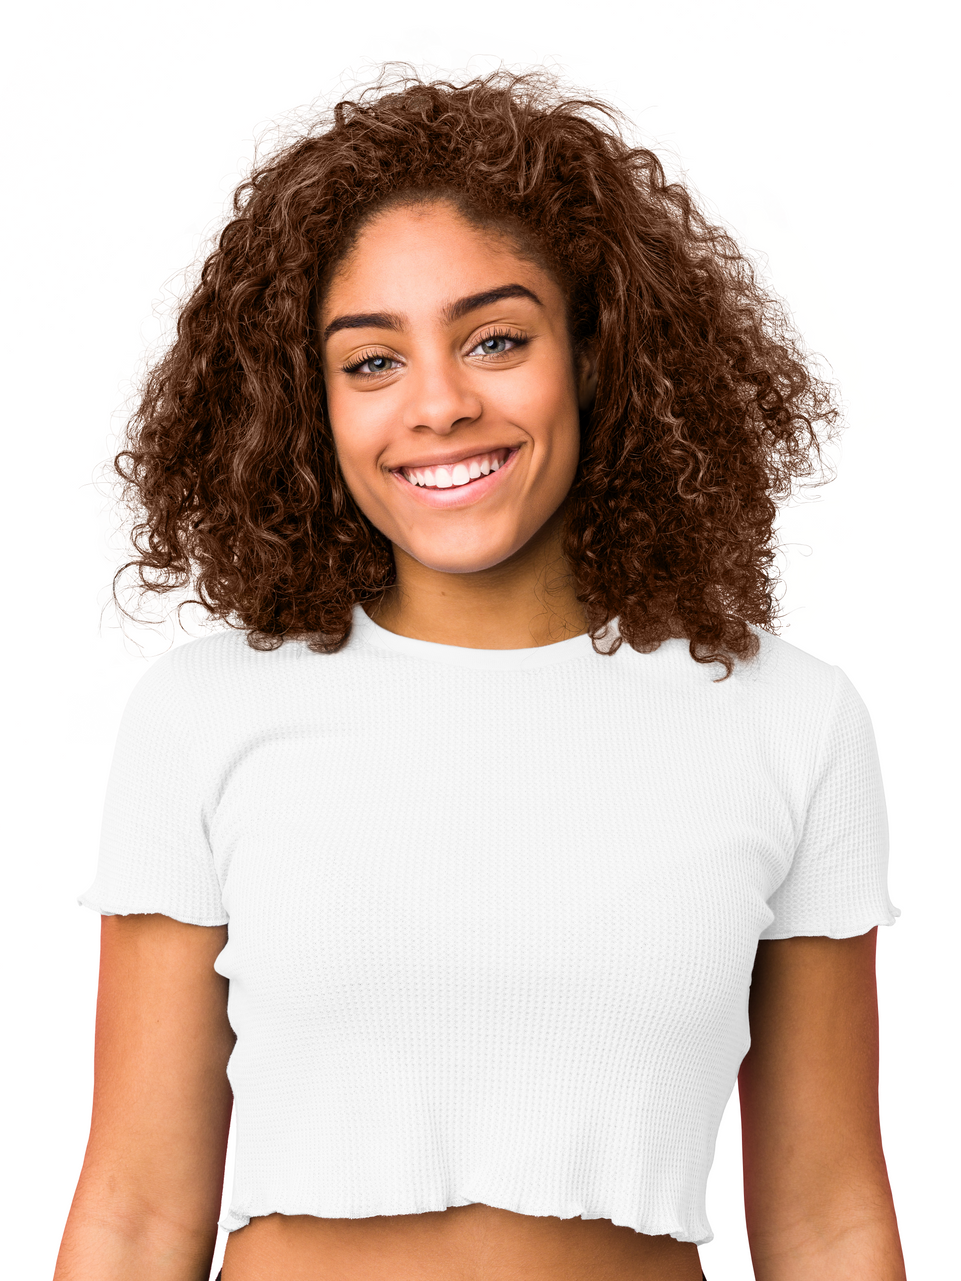 a woman with curly hair is wearing a white crop top and smiling .